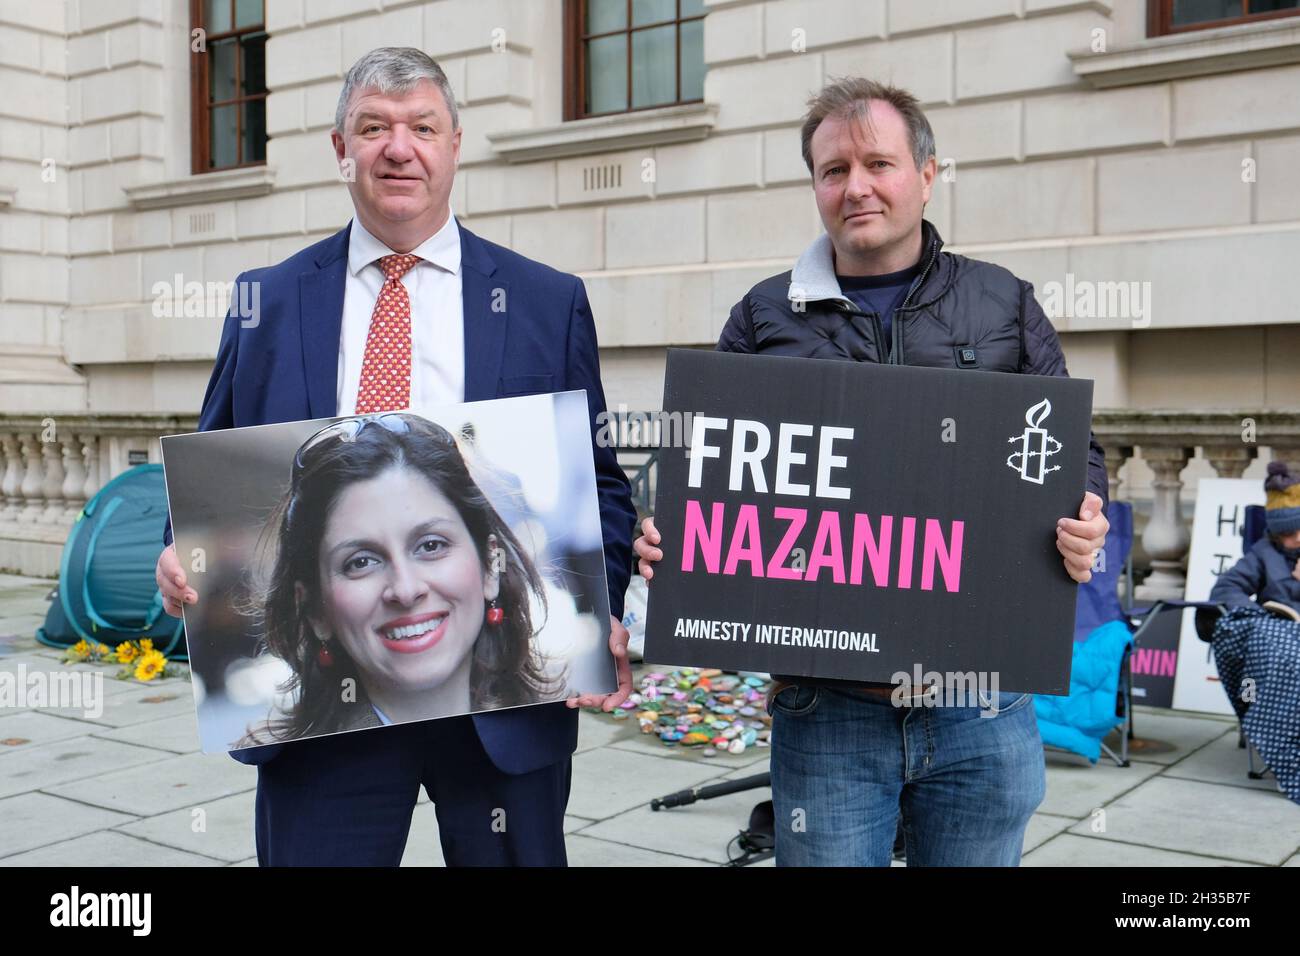 Richard Ratcliffe stands with MP for Orkney and Shetland, Alistair Carmichael as they discuss the situation for wife Nazanin, detained in Iran. Stock Photo